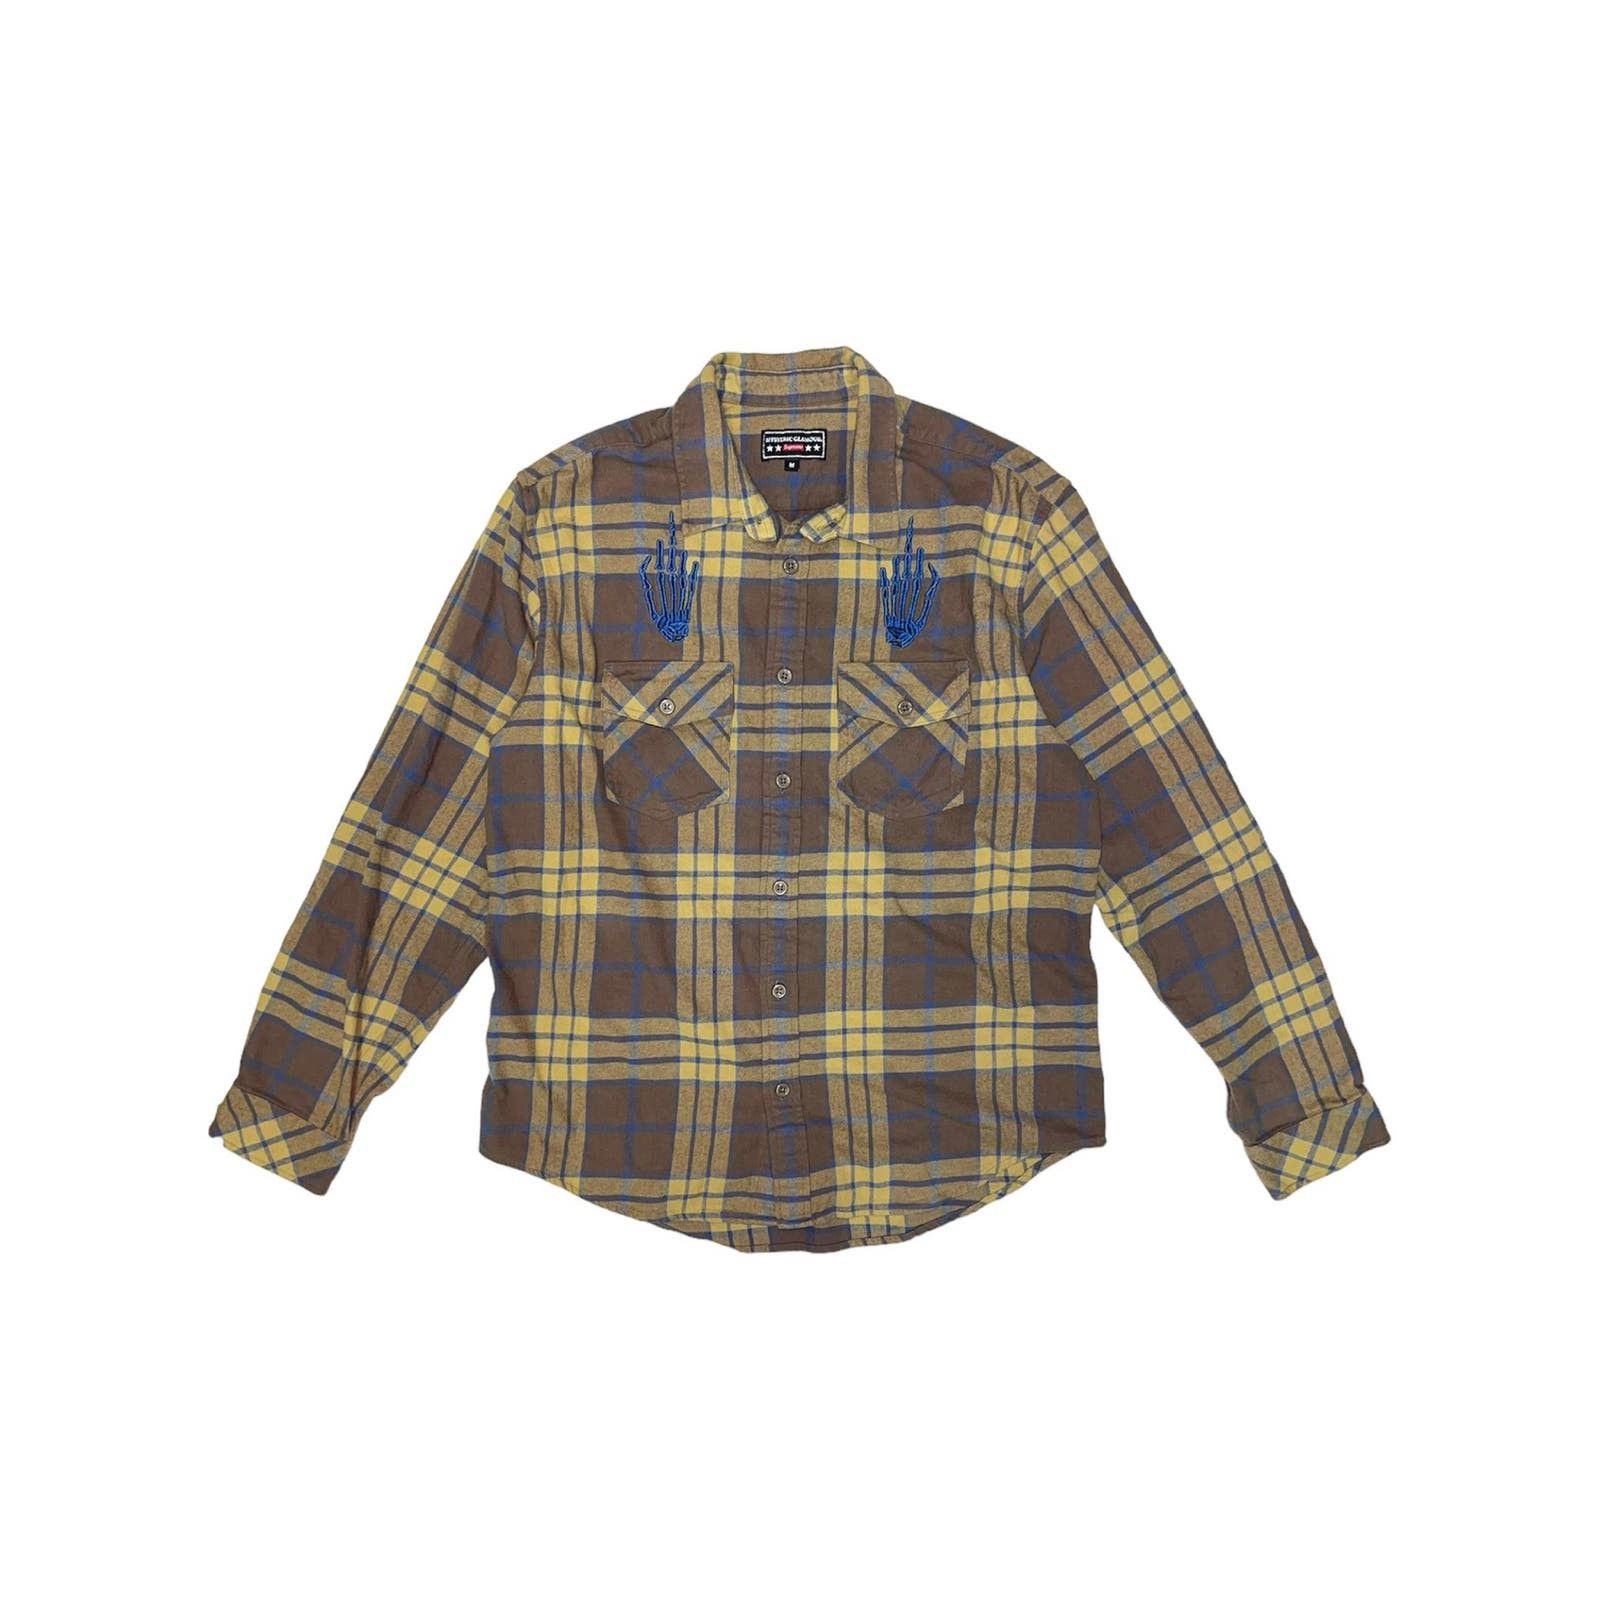 Supreme Supreme x Hysteric Glamour Flannel Button Up Shirt | Grailed